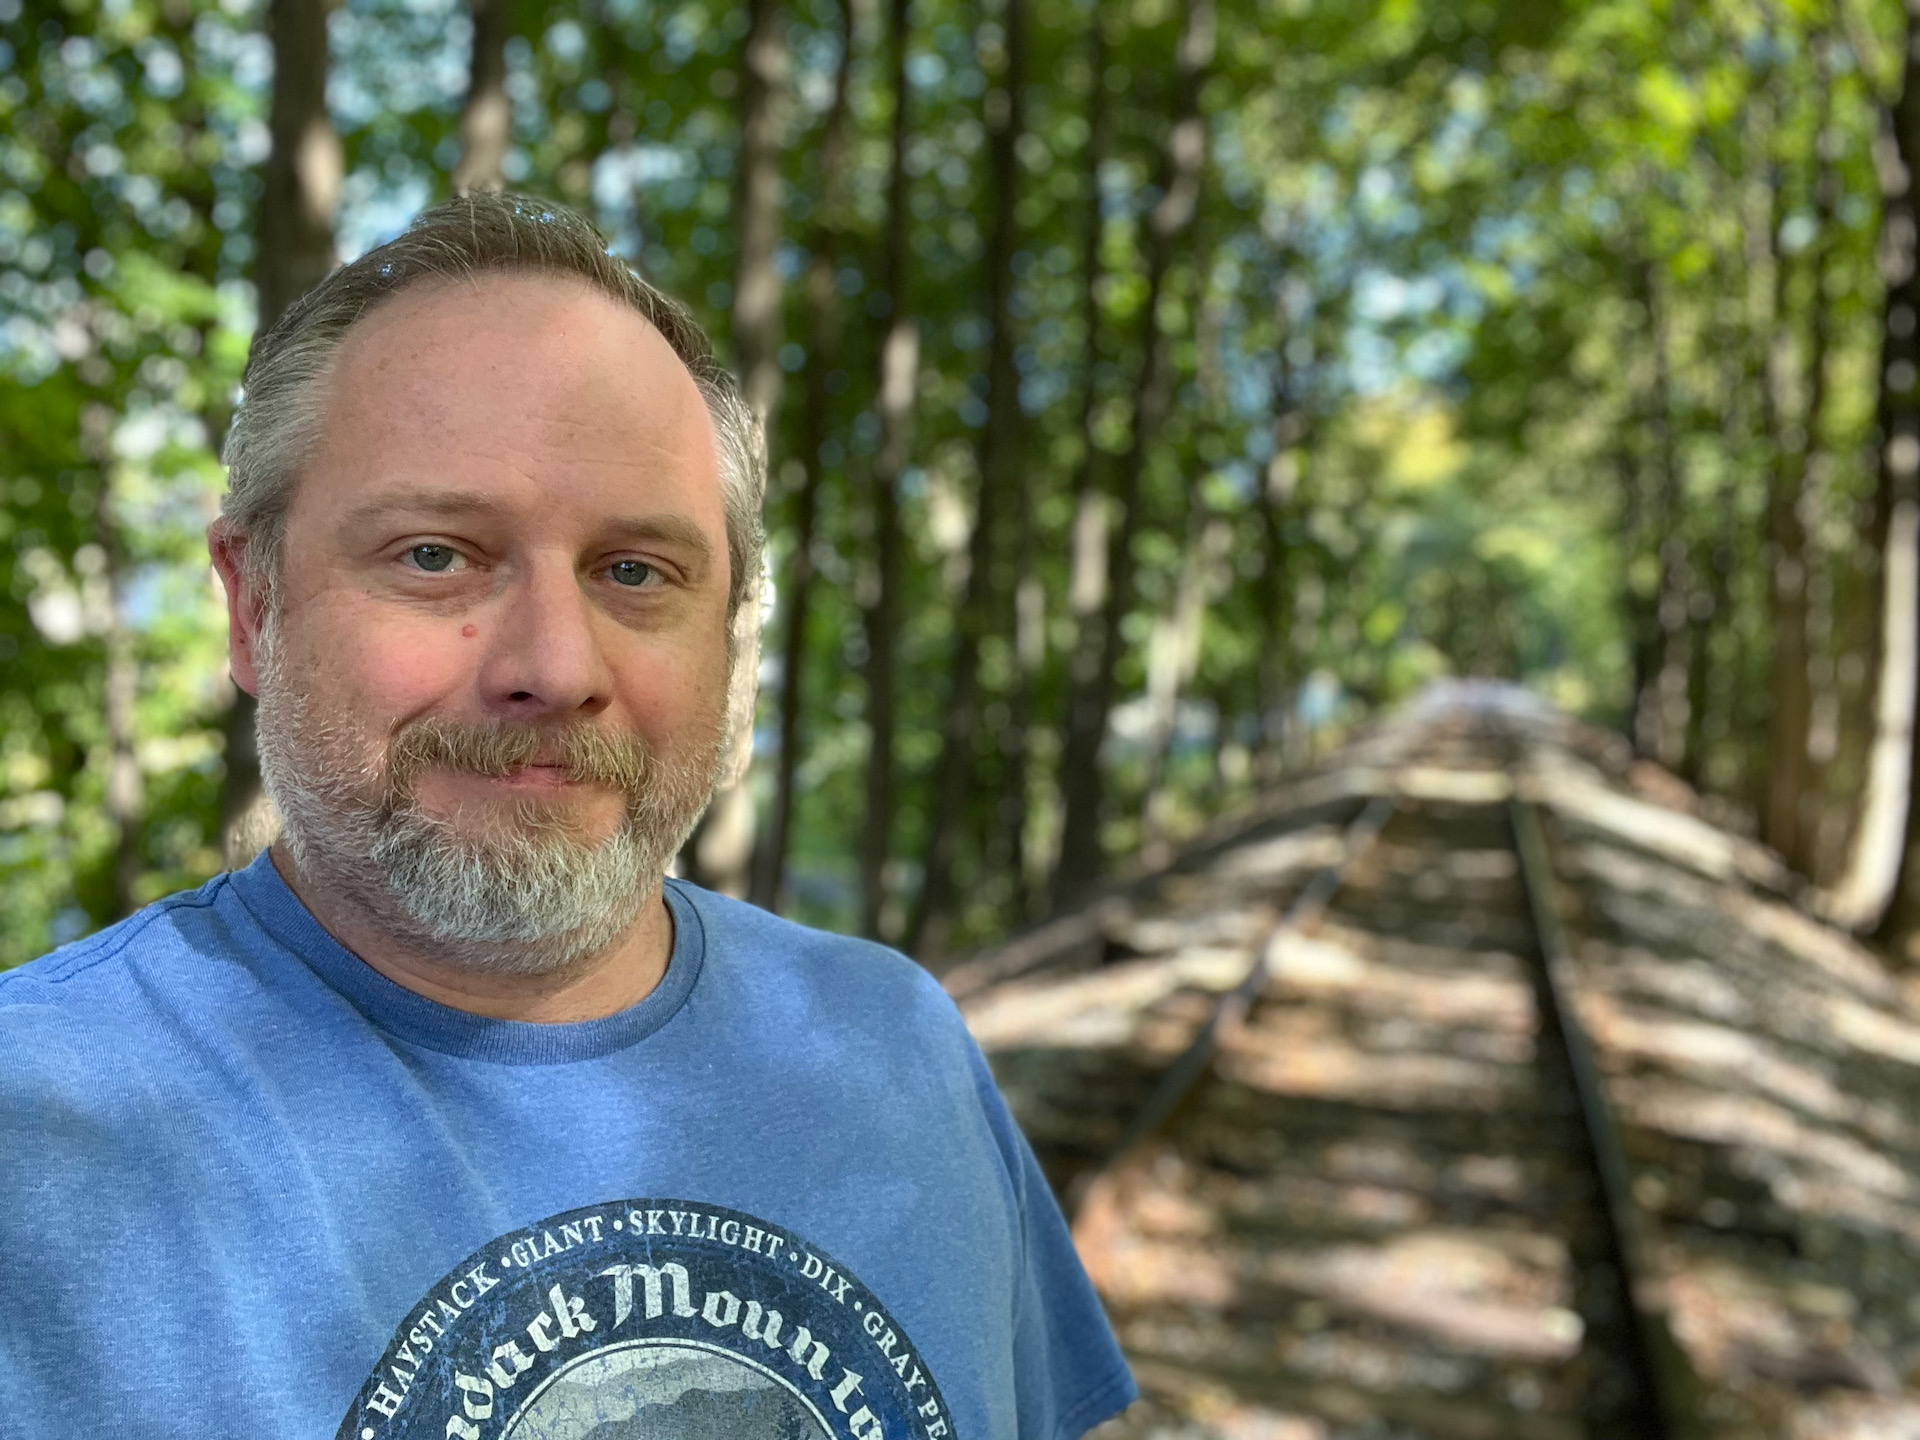 Apple iPhone 13 photo sample portrait on train tracks of a man with light colored hair and beard wearing a bright blue t-shirt